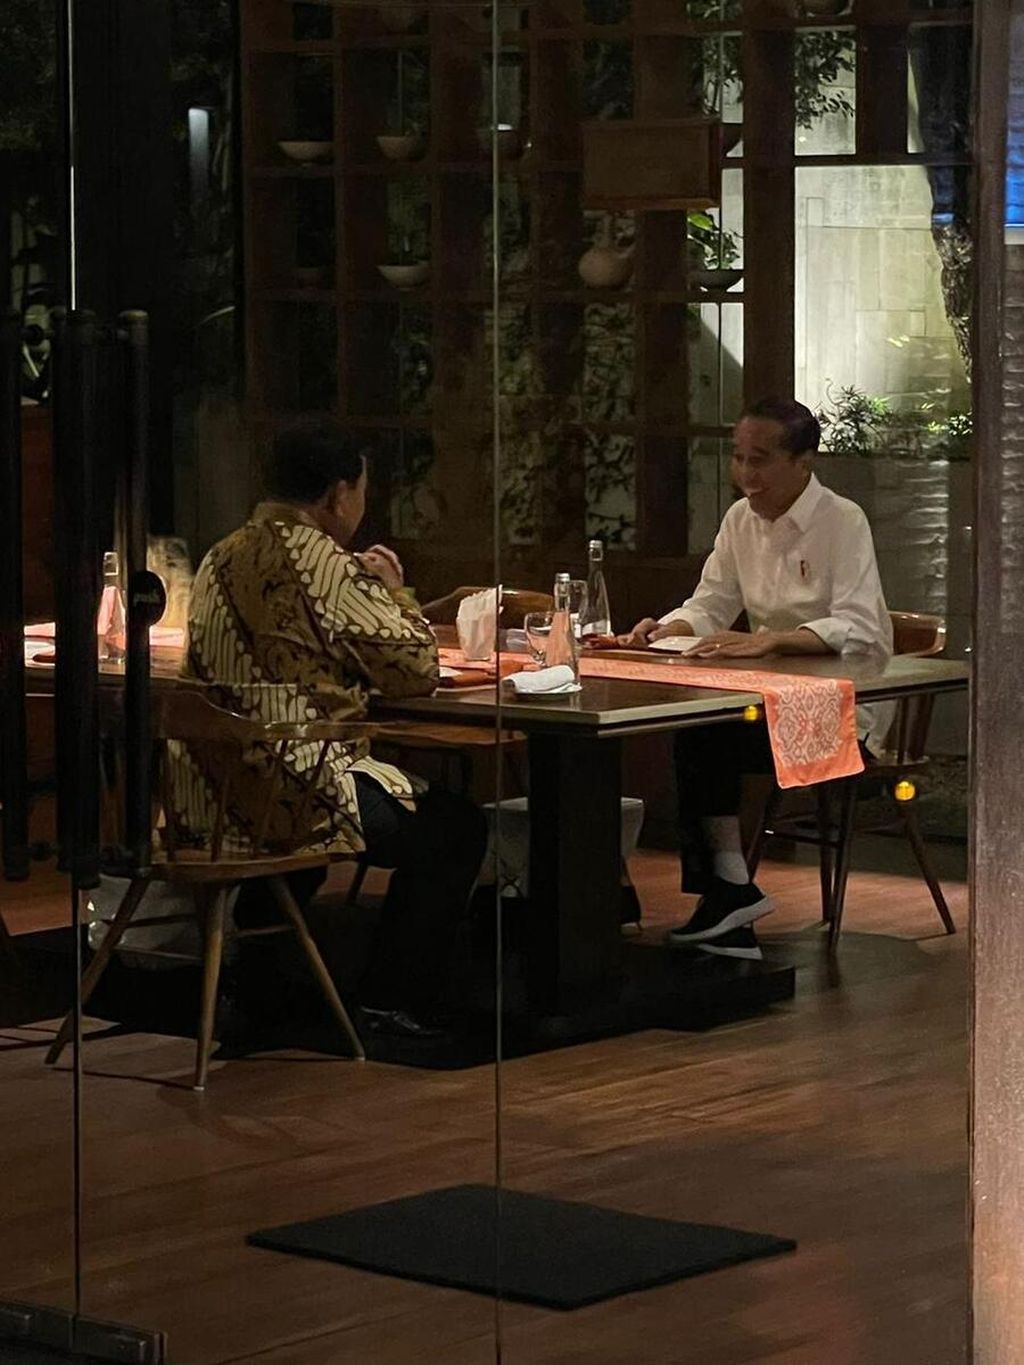 Amid the heated political climate leading up to the 2024 presidential election, President Joko Widodo had a dinner with Defense Minister and presidential candidate Prabowo Subianto in Jakarta on Friday (5/1/2023).